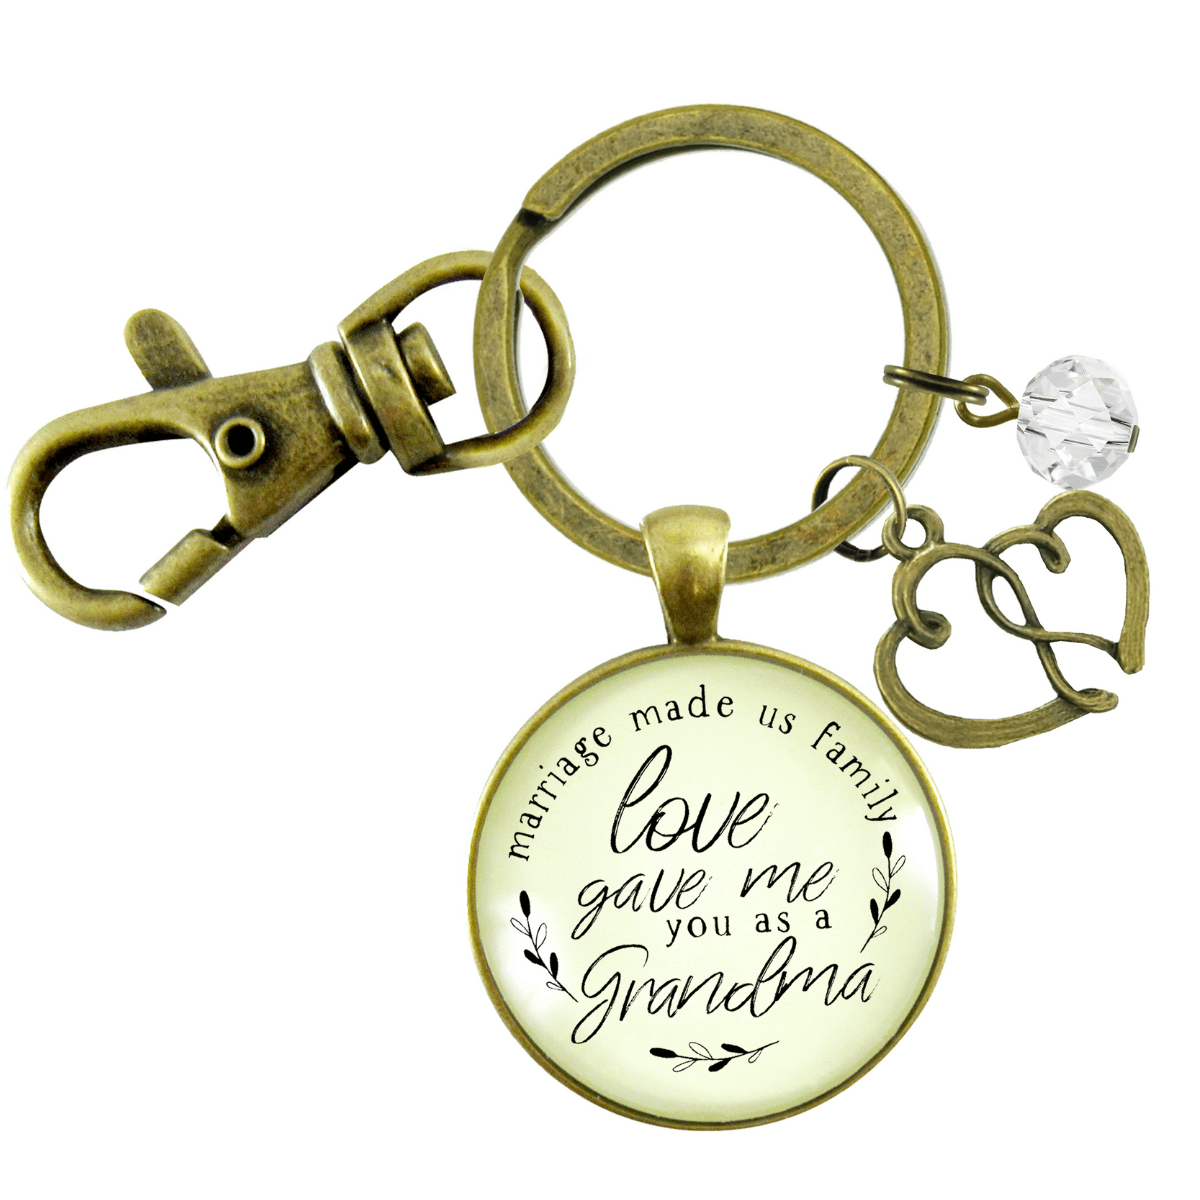 Grandma Gift For Wedding Keychain Marriage Made Us Family Love Made You Grandmother Jewelry Heart - Gutsy Goodness Handmade Jewelry;Grandma Gift For Wedding Keychain Marriage Made Us Family Love Made You Grandmother Jewelry Heart - Gutsy Goodness Handmade Jewelry Gifts